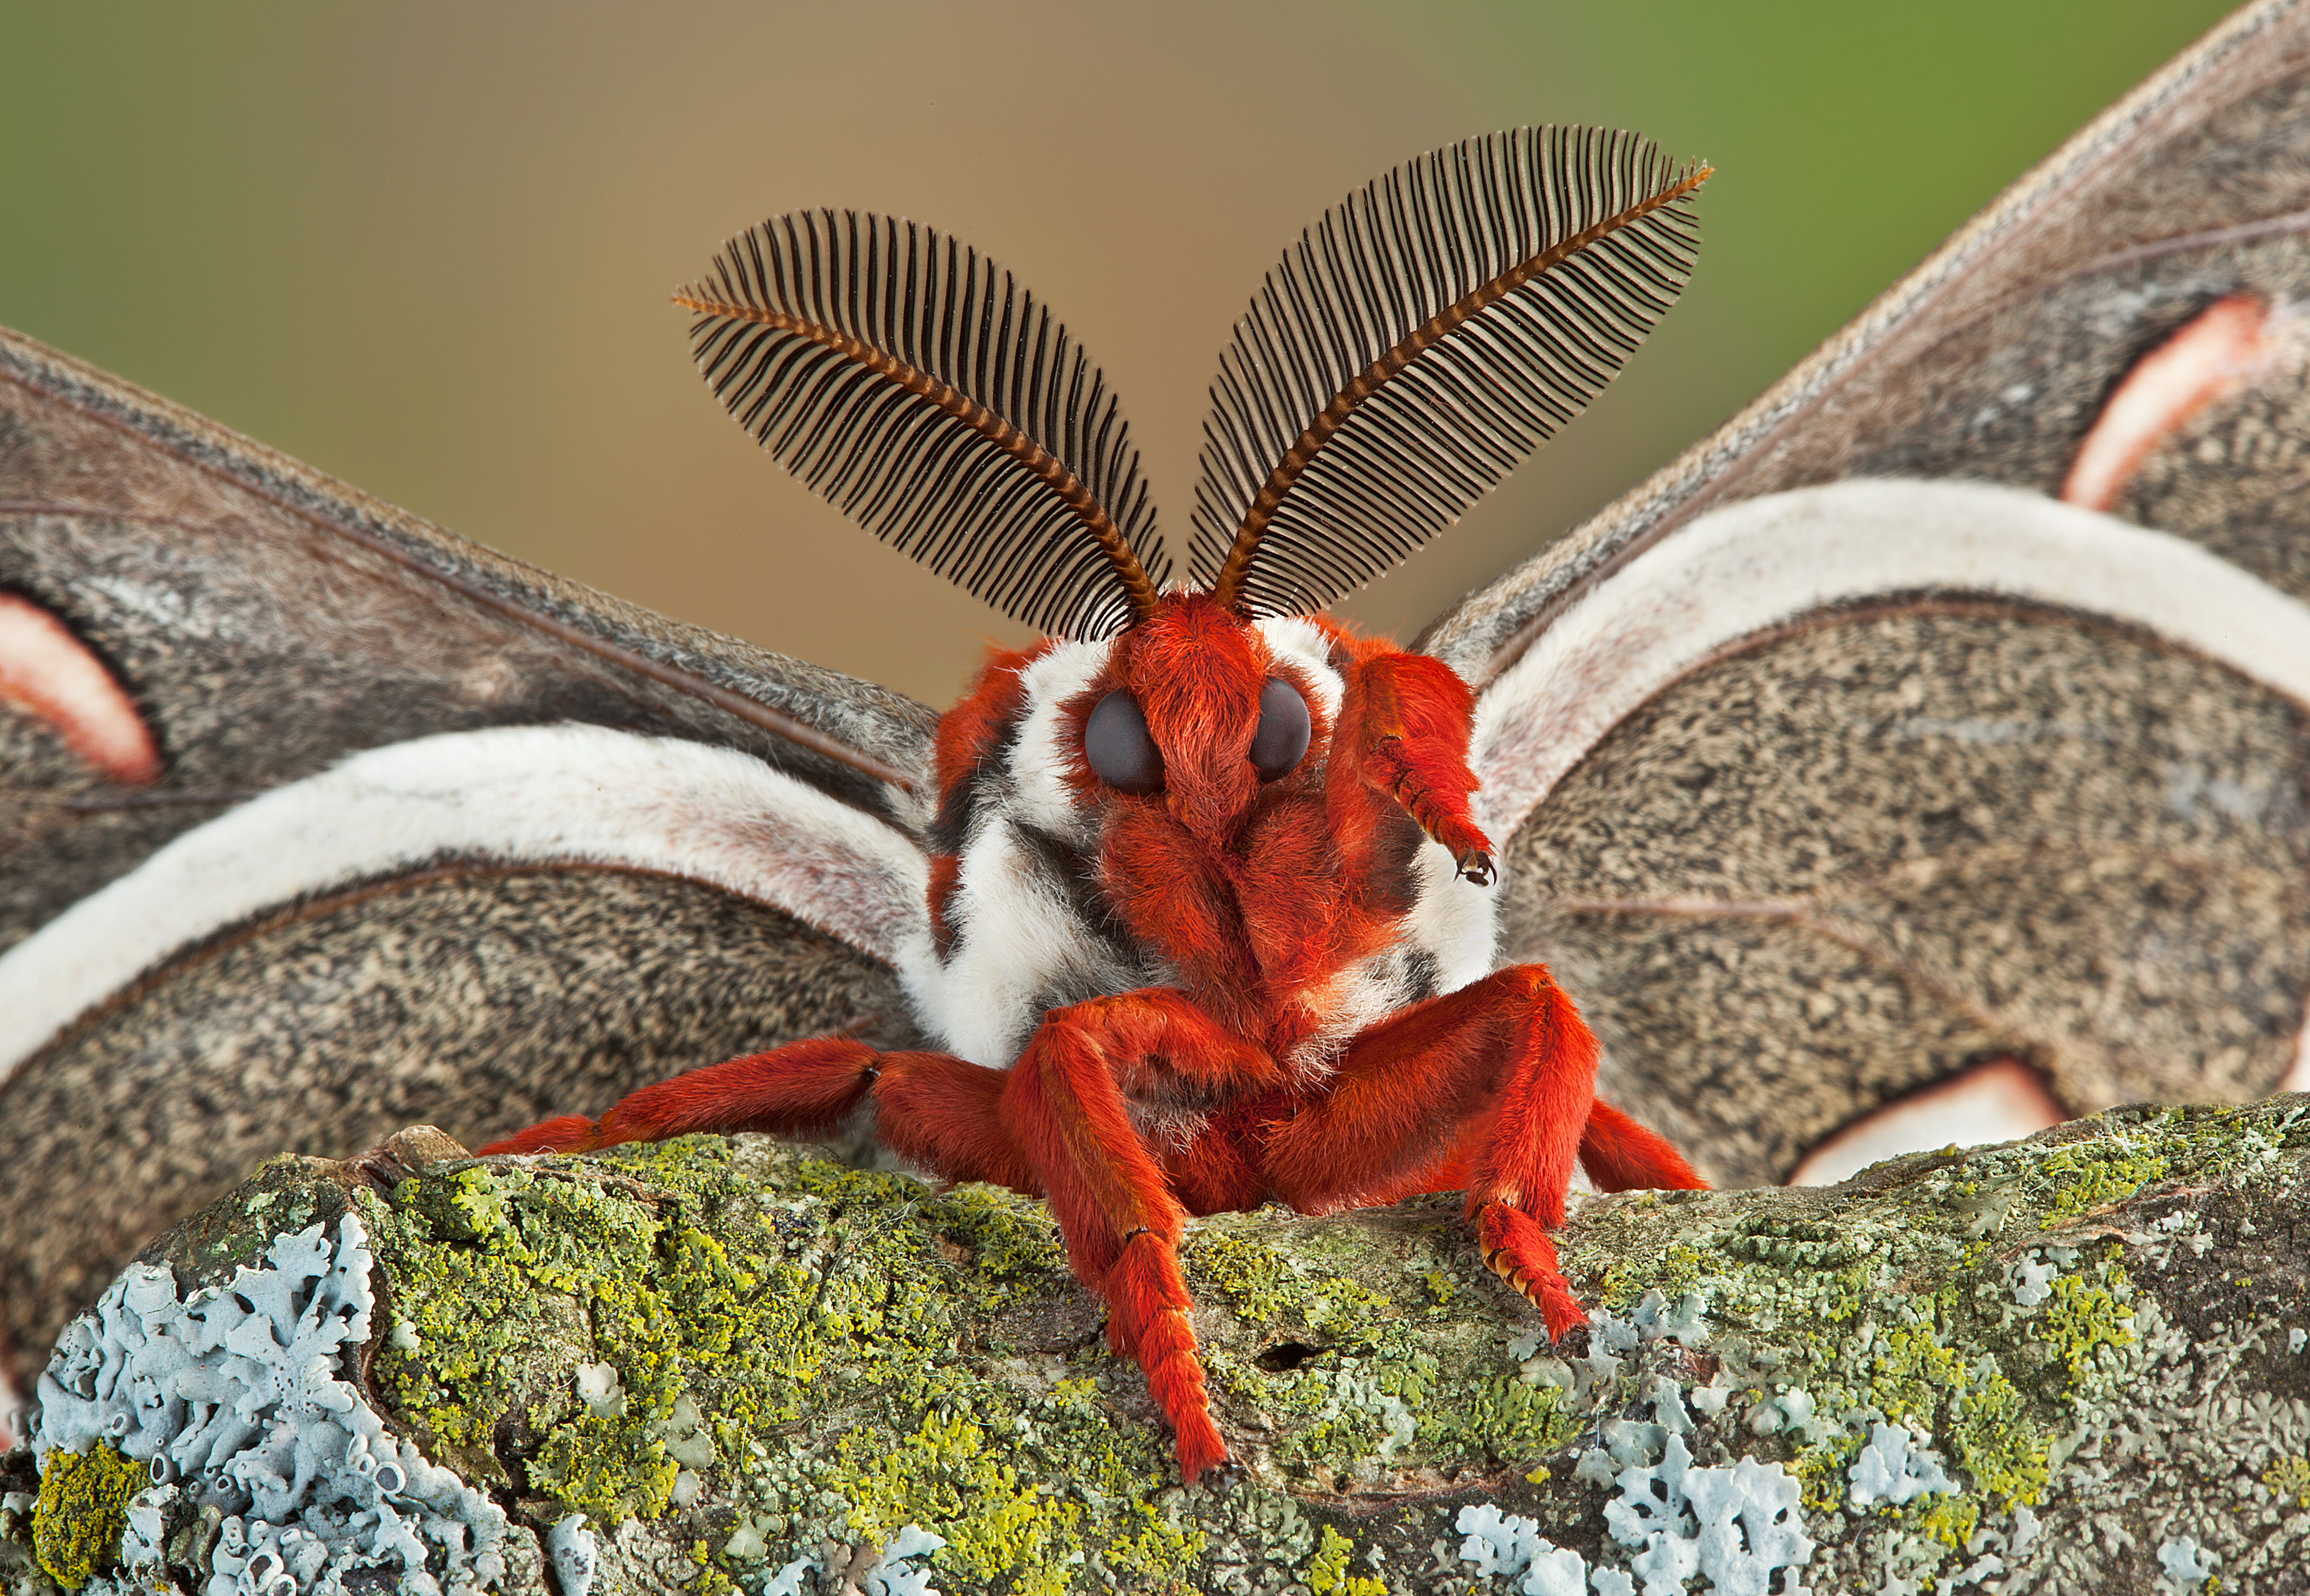 Meet the cecropia moth, the largest moth in North America | MNN ...